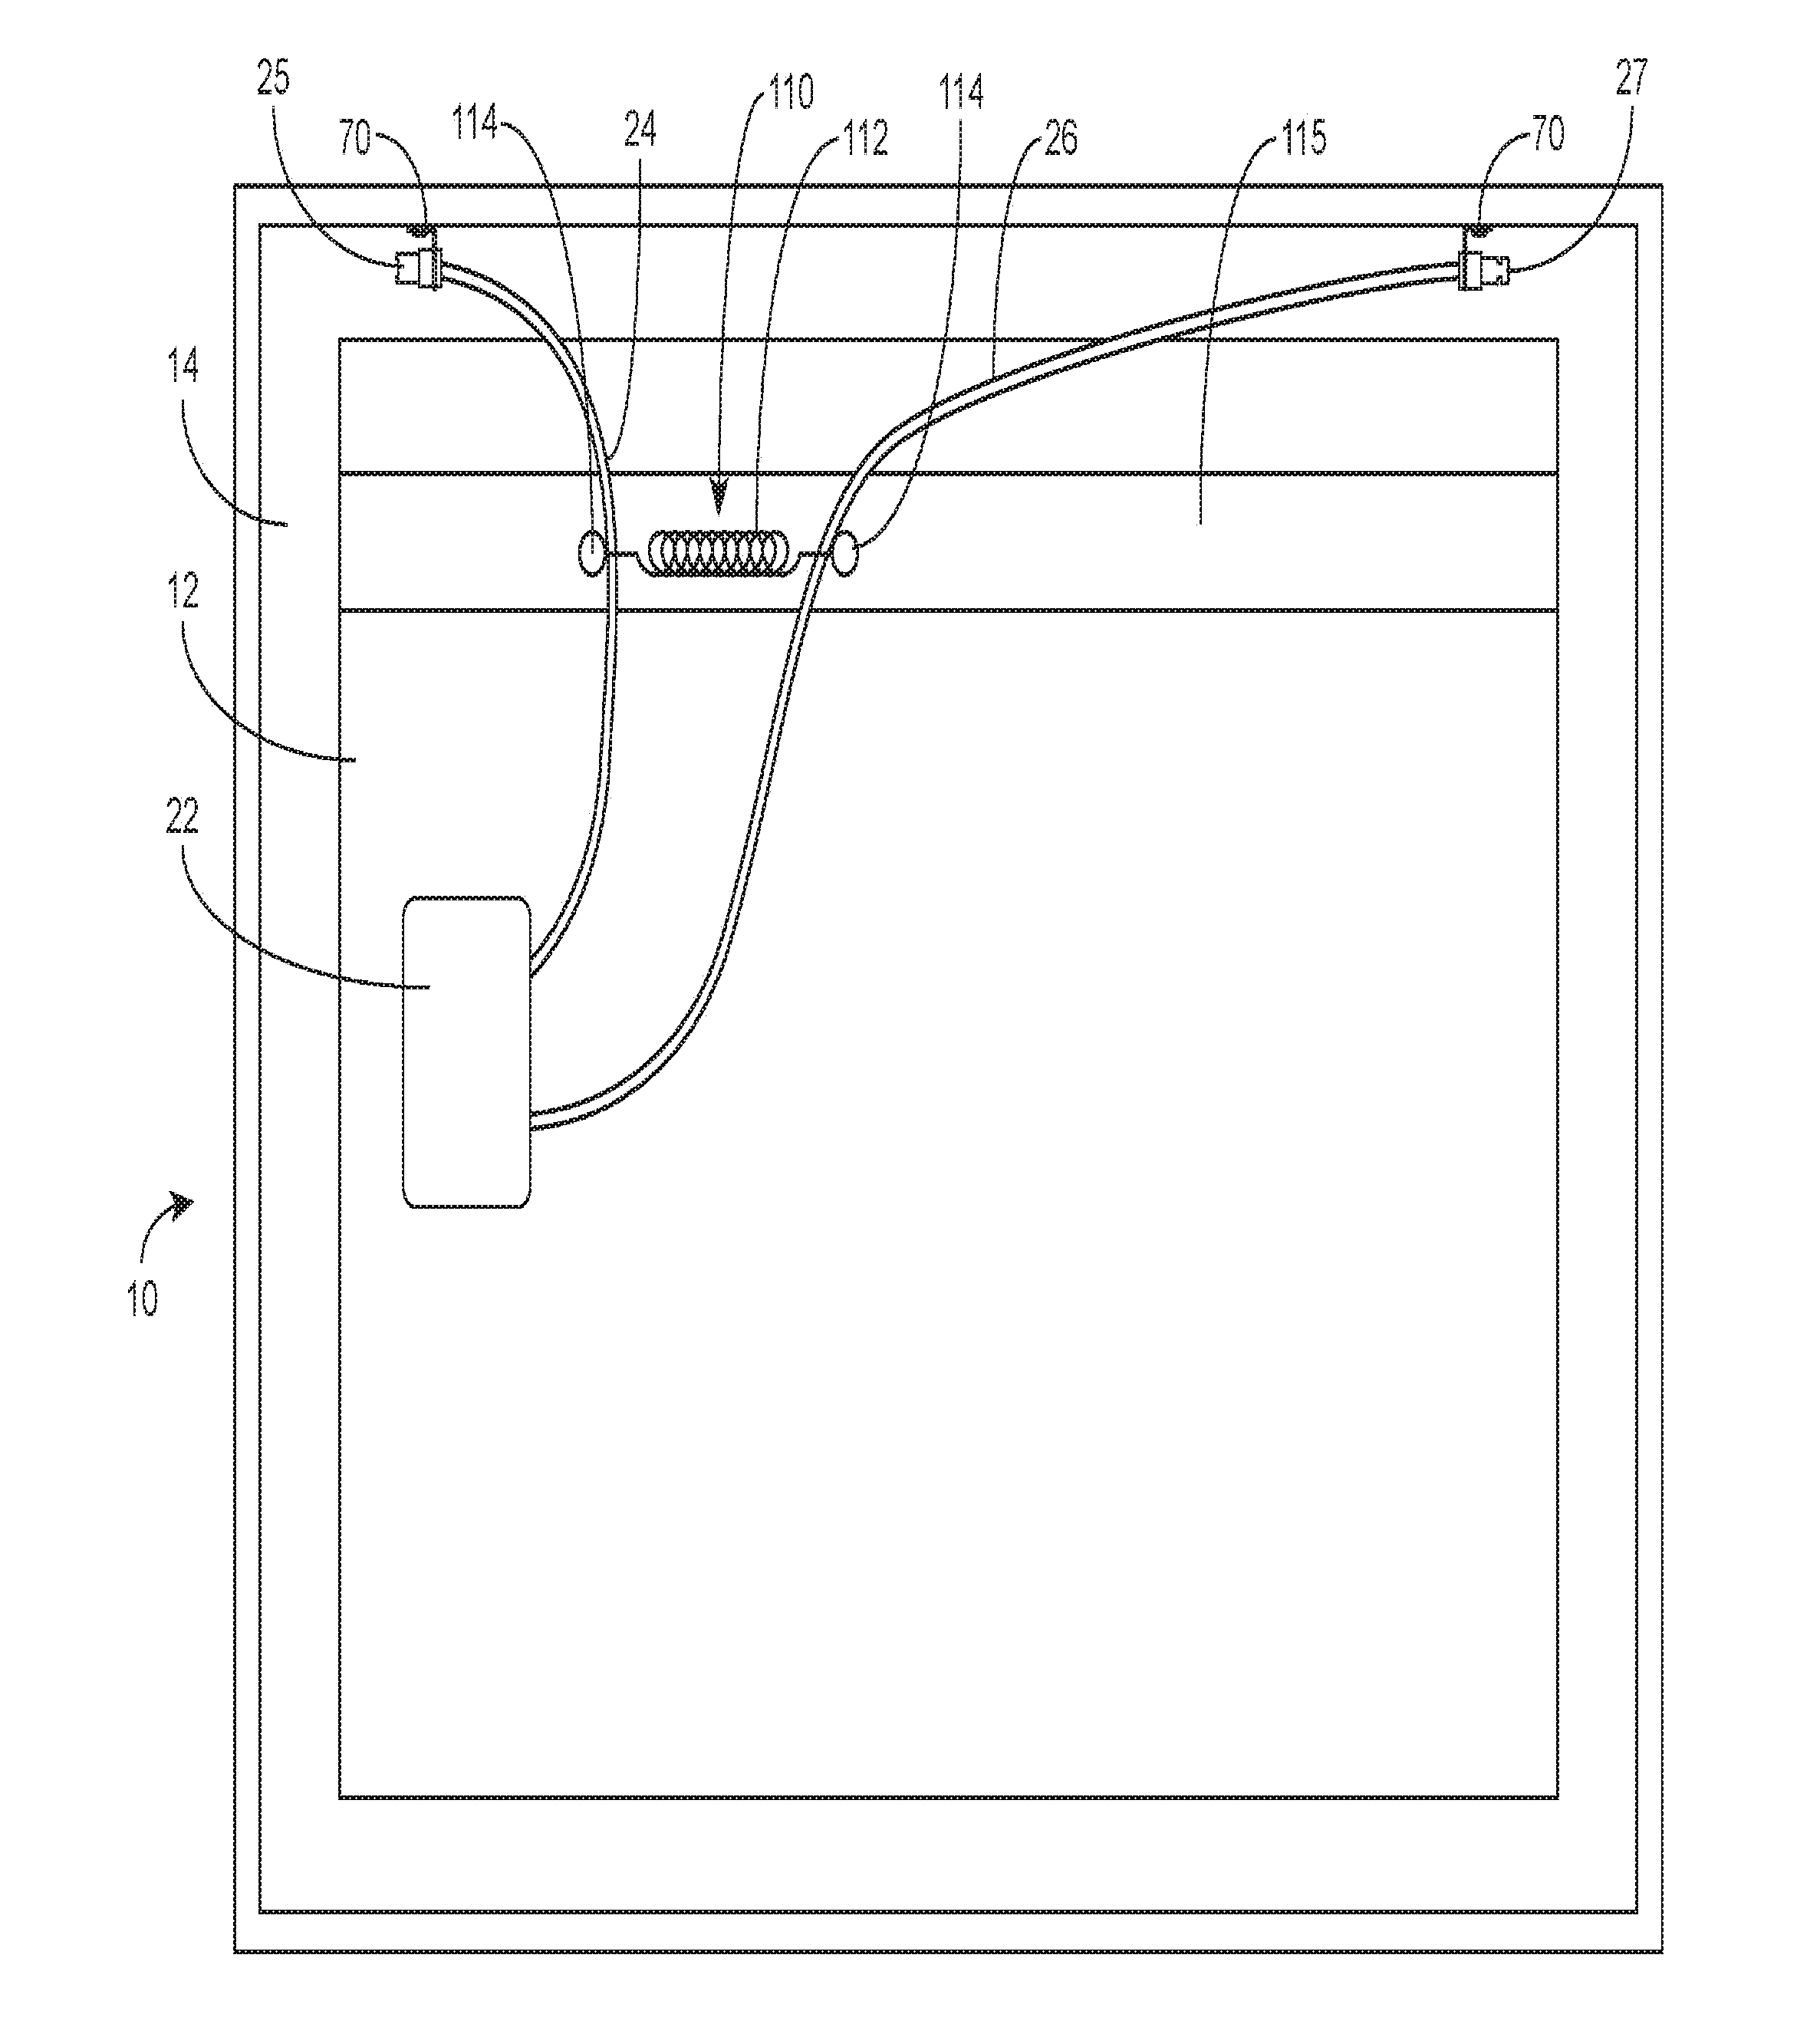 Retractable wiring system for a photovoltaic module